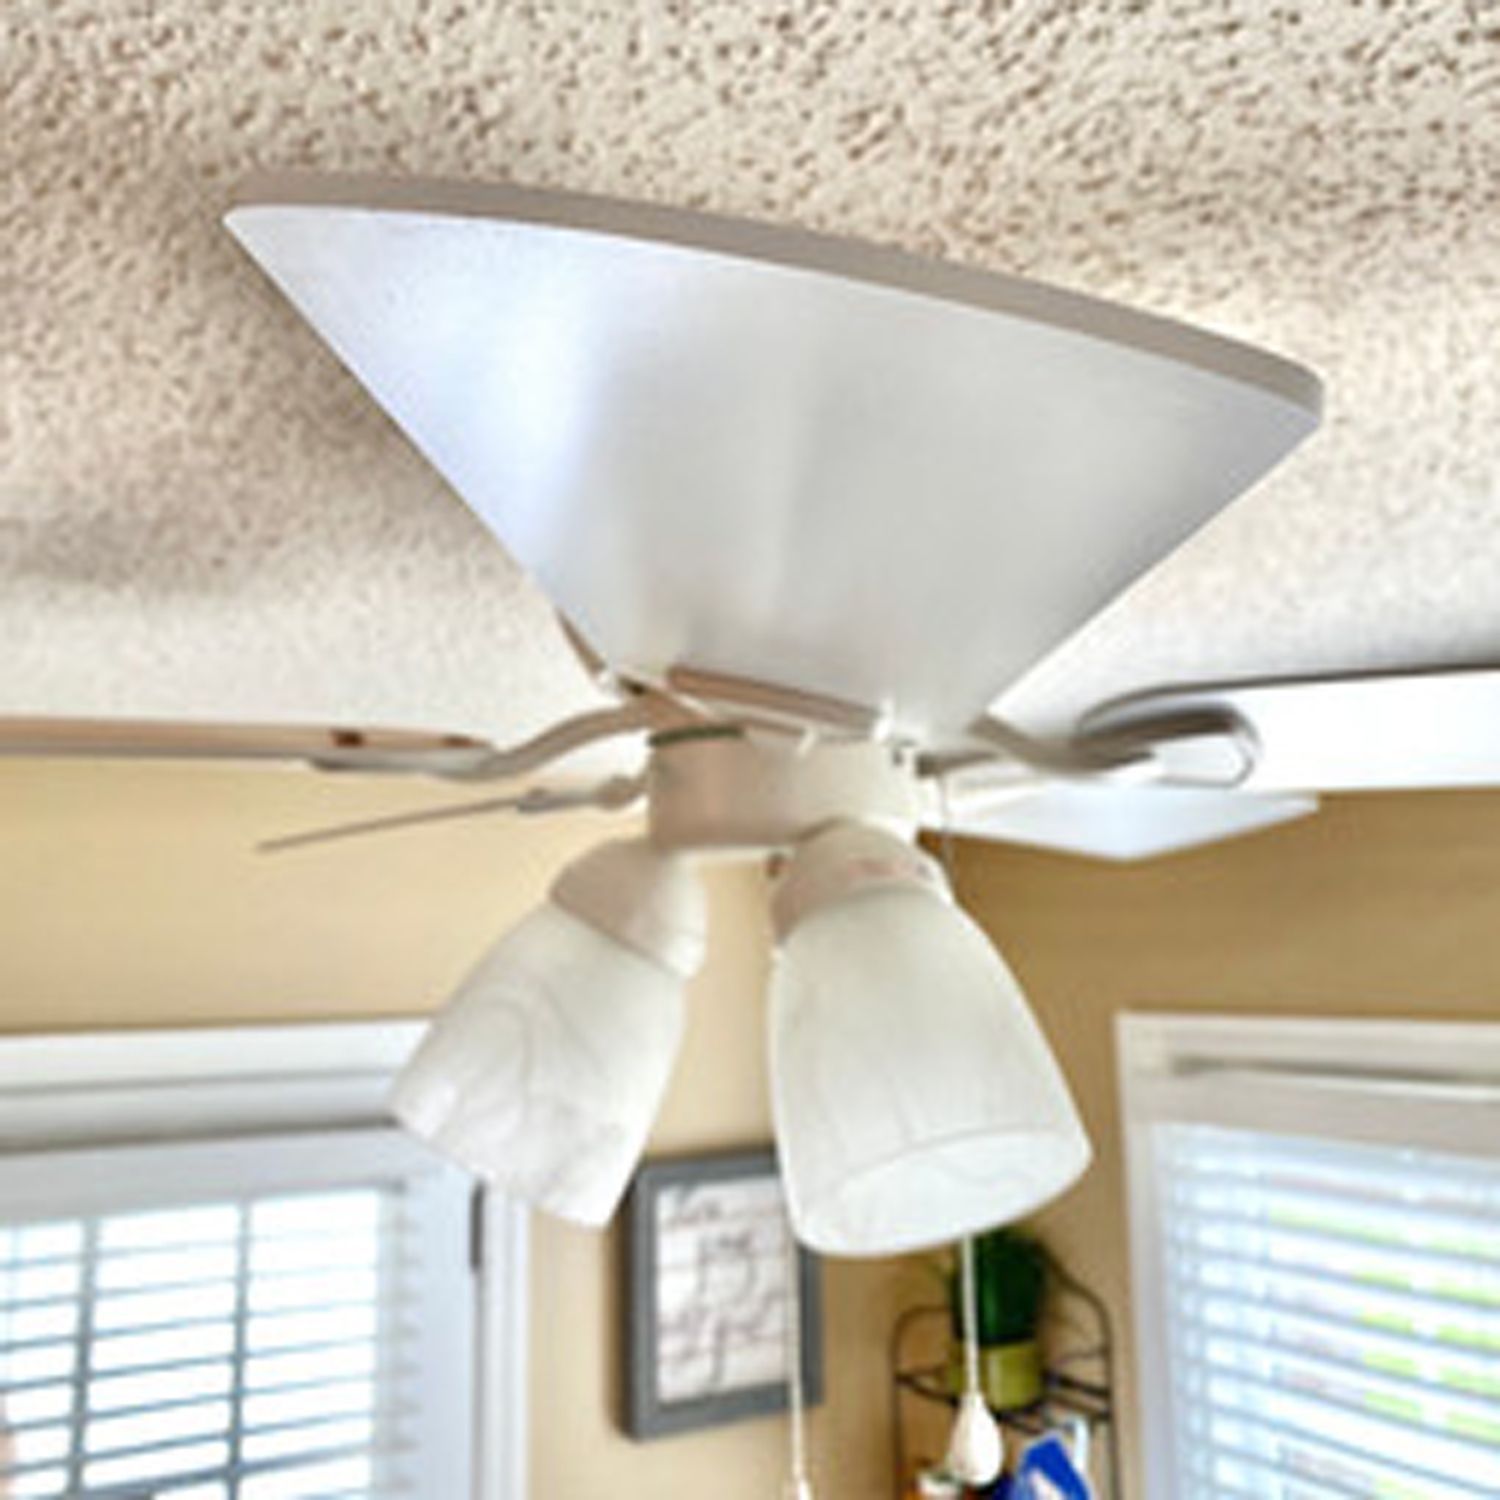 Polished Ceiling Fan | Fayetteville, NC | A & A Janitorial Services LLC